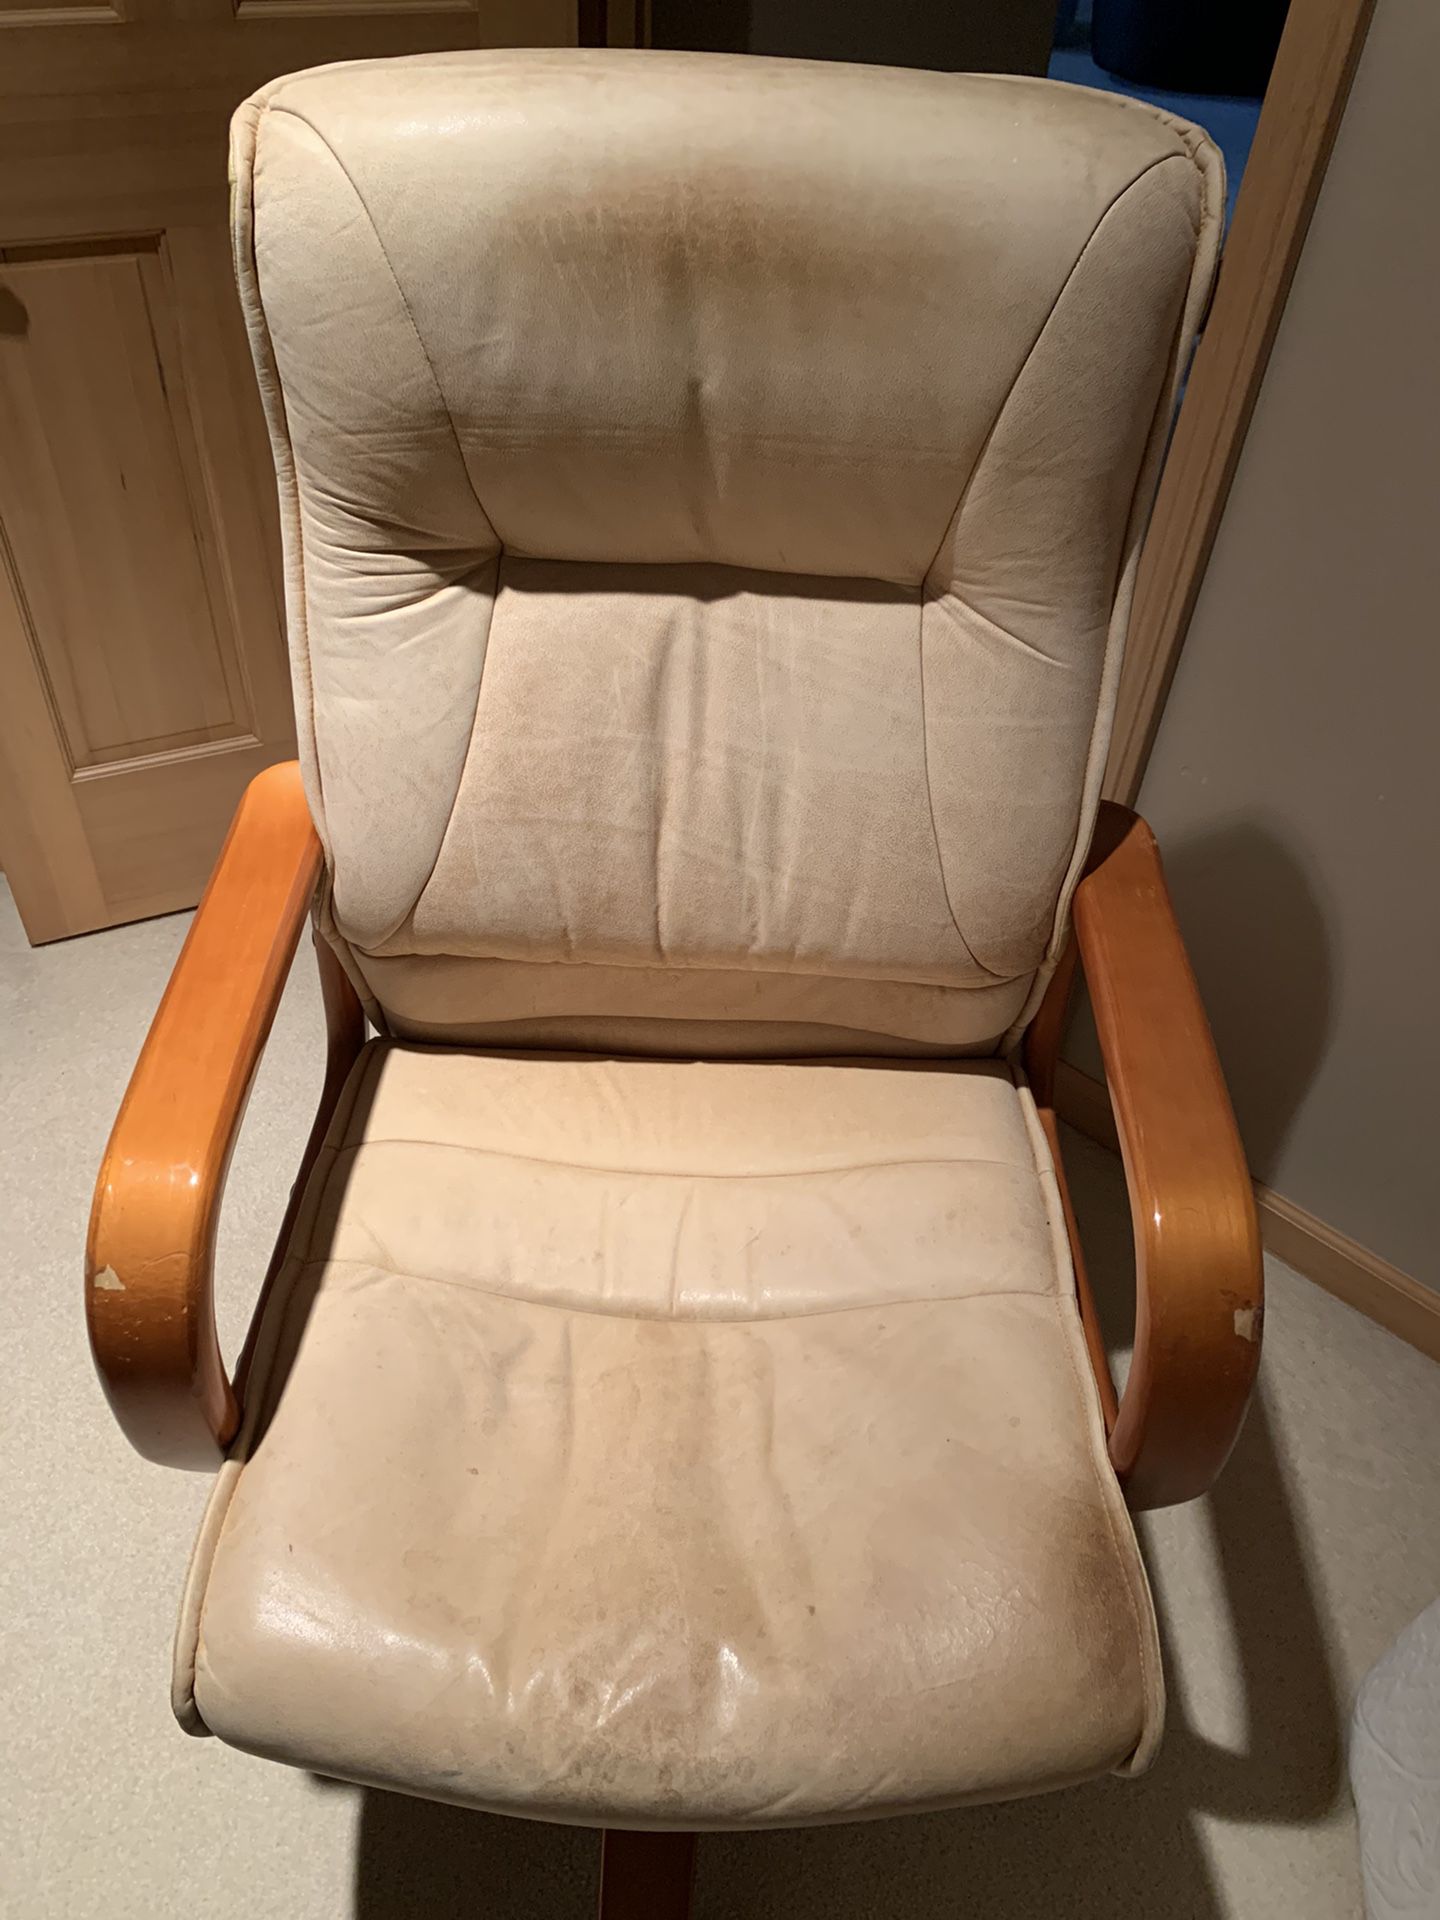 Office chair ($15)